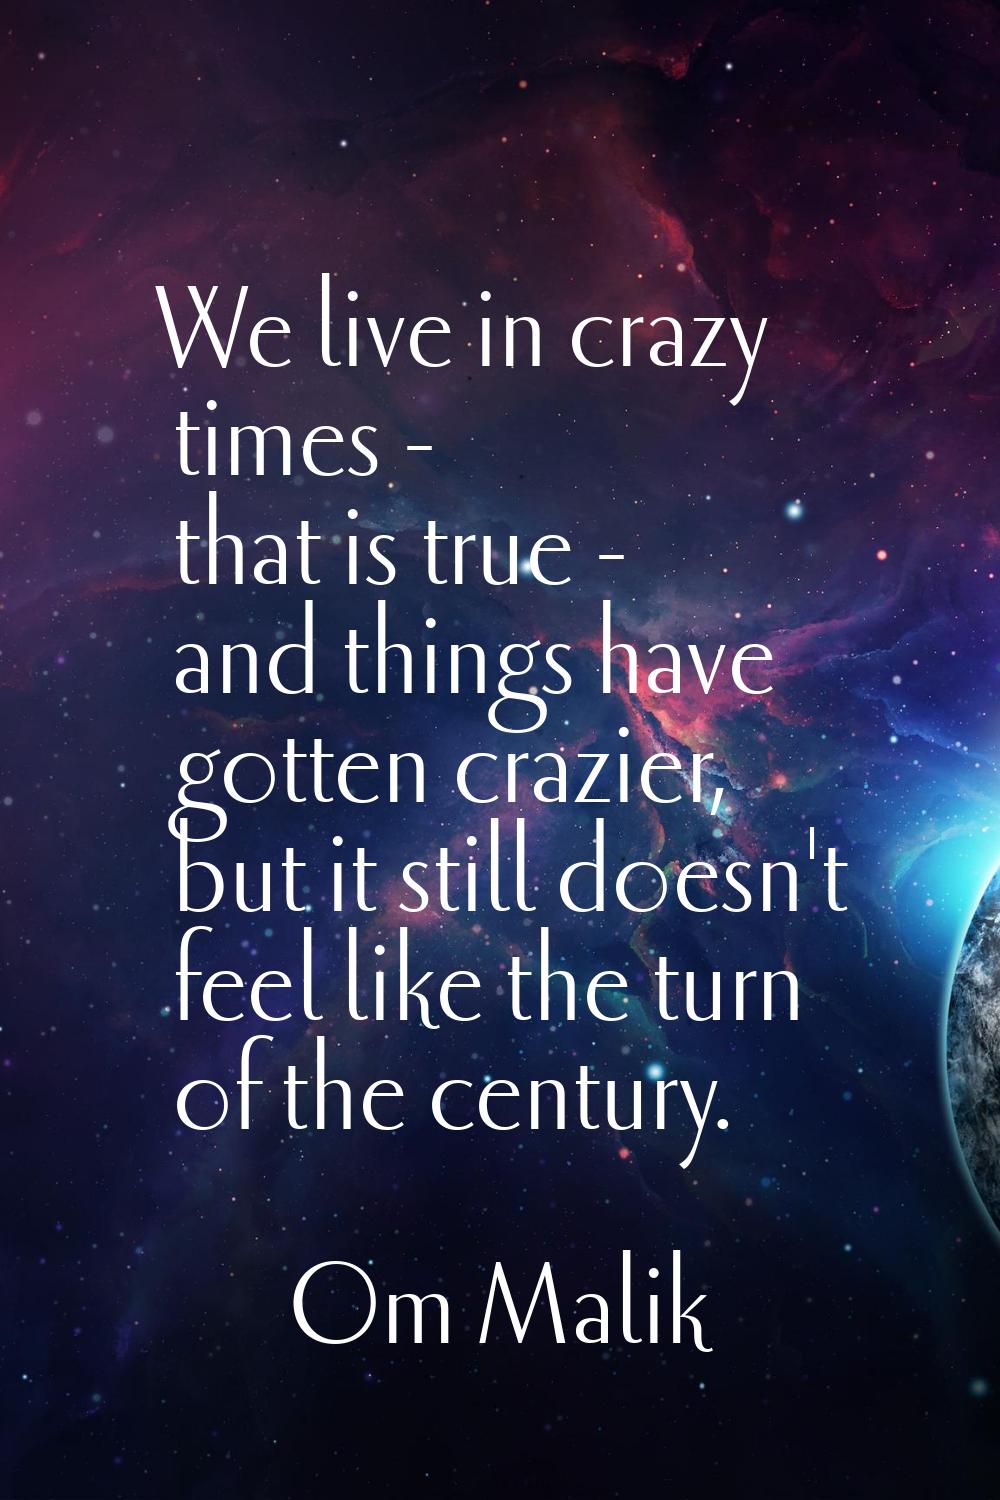 We live in crazy times - that is true - and things have gotten crazier, but it still doesn't feel l